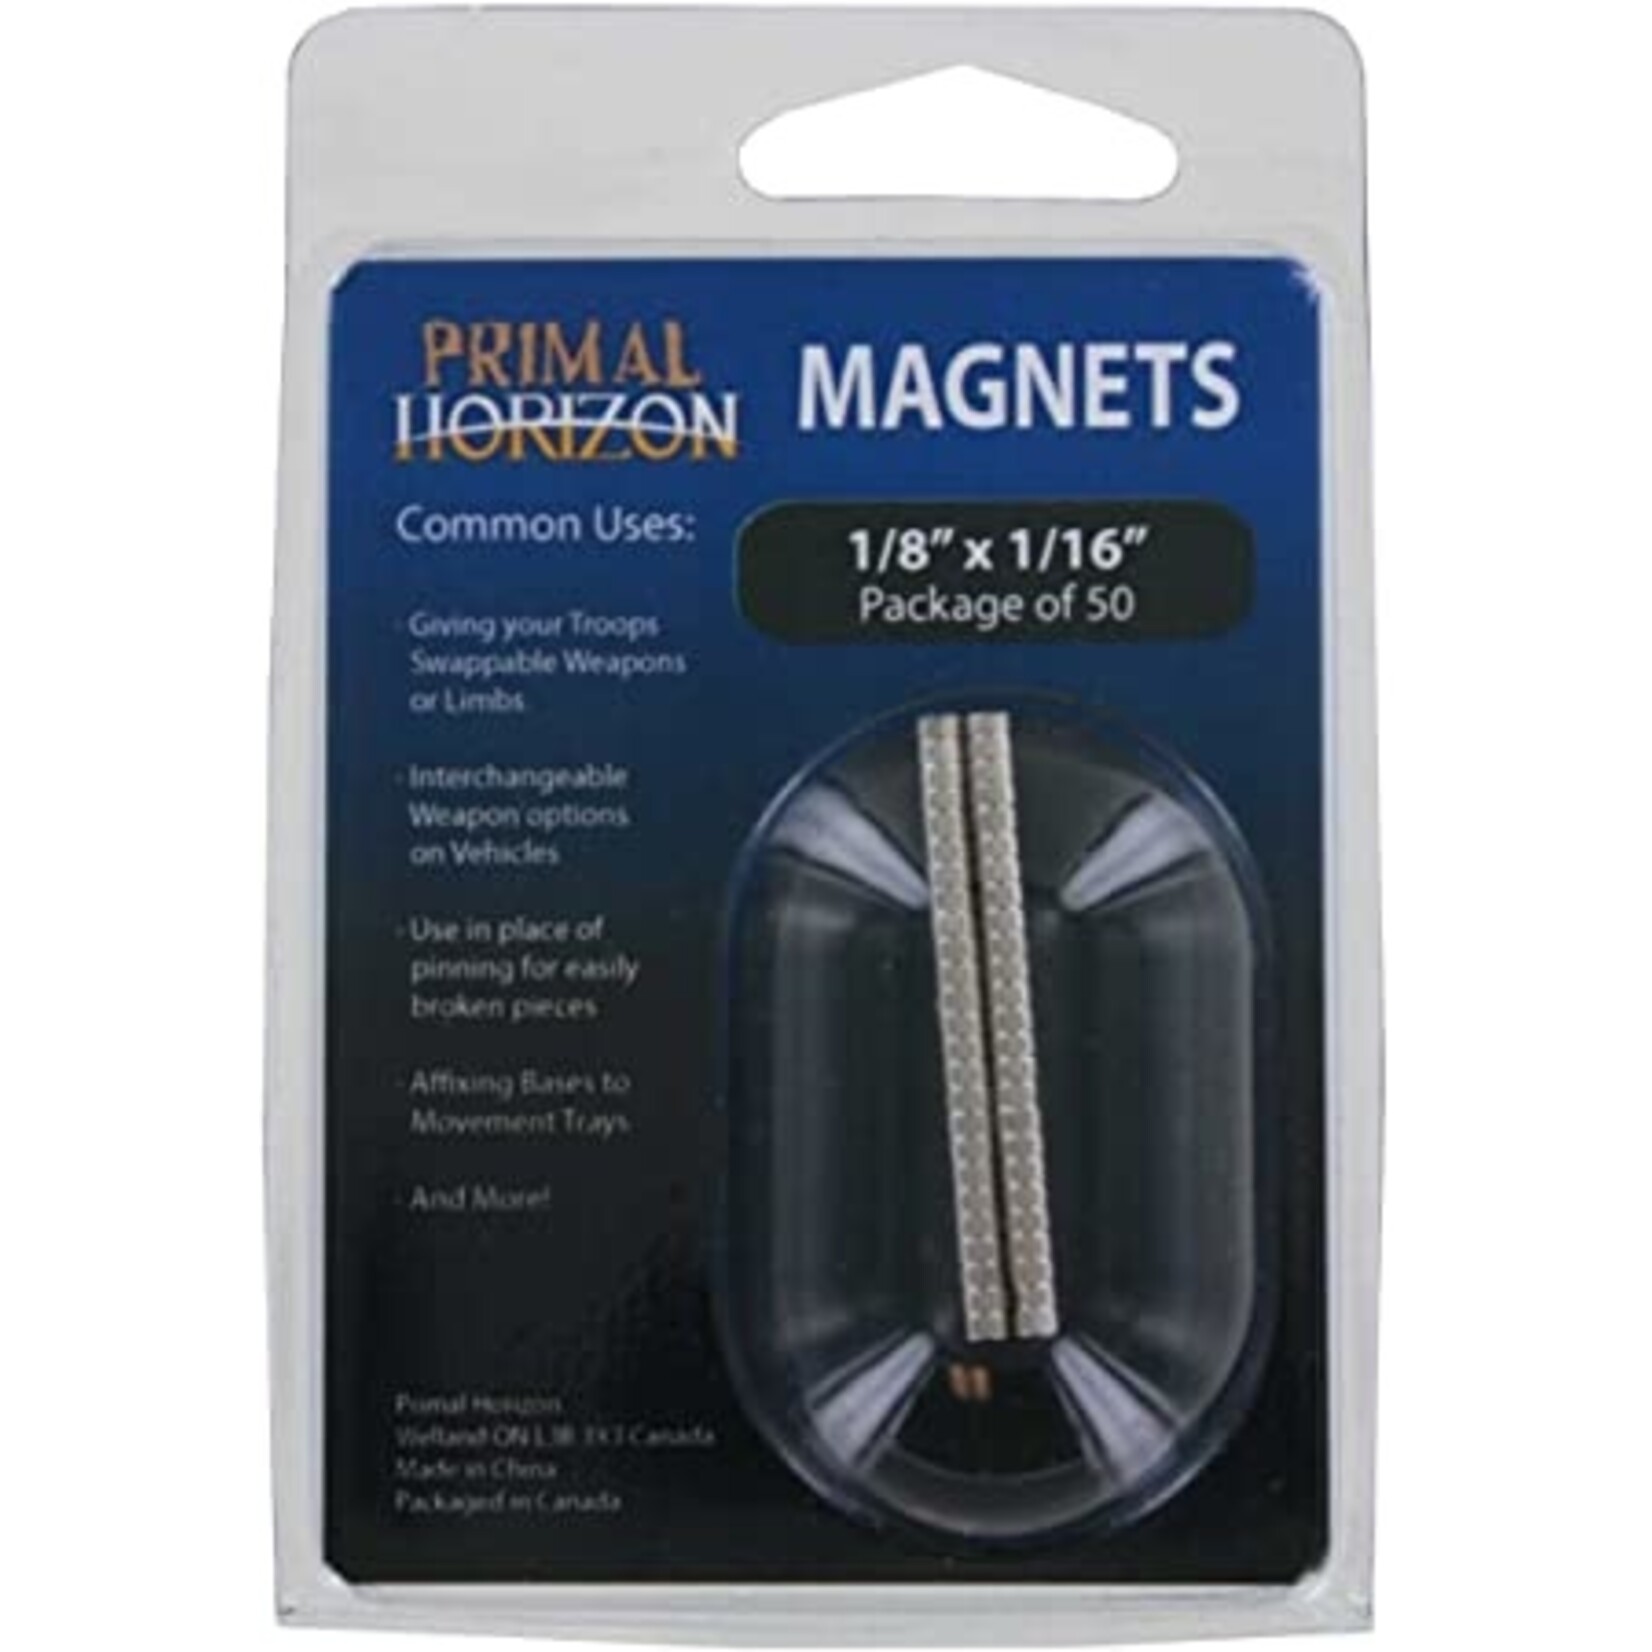 Magnets 1/8” x 1/16” 50ct (PHZ)